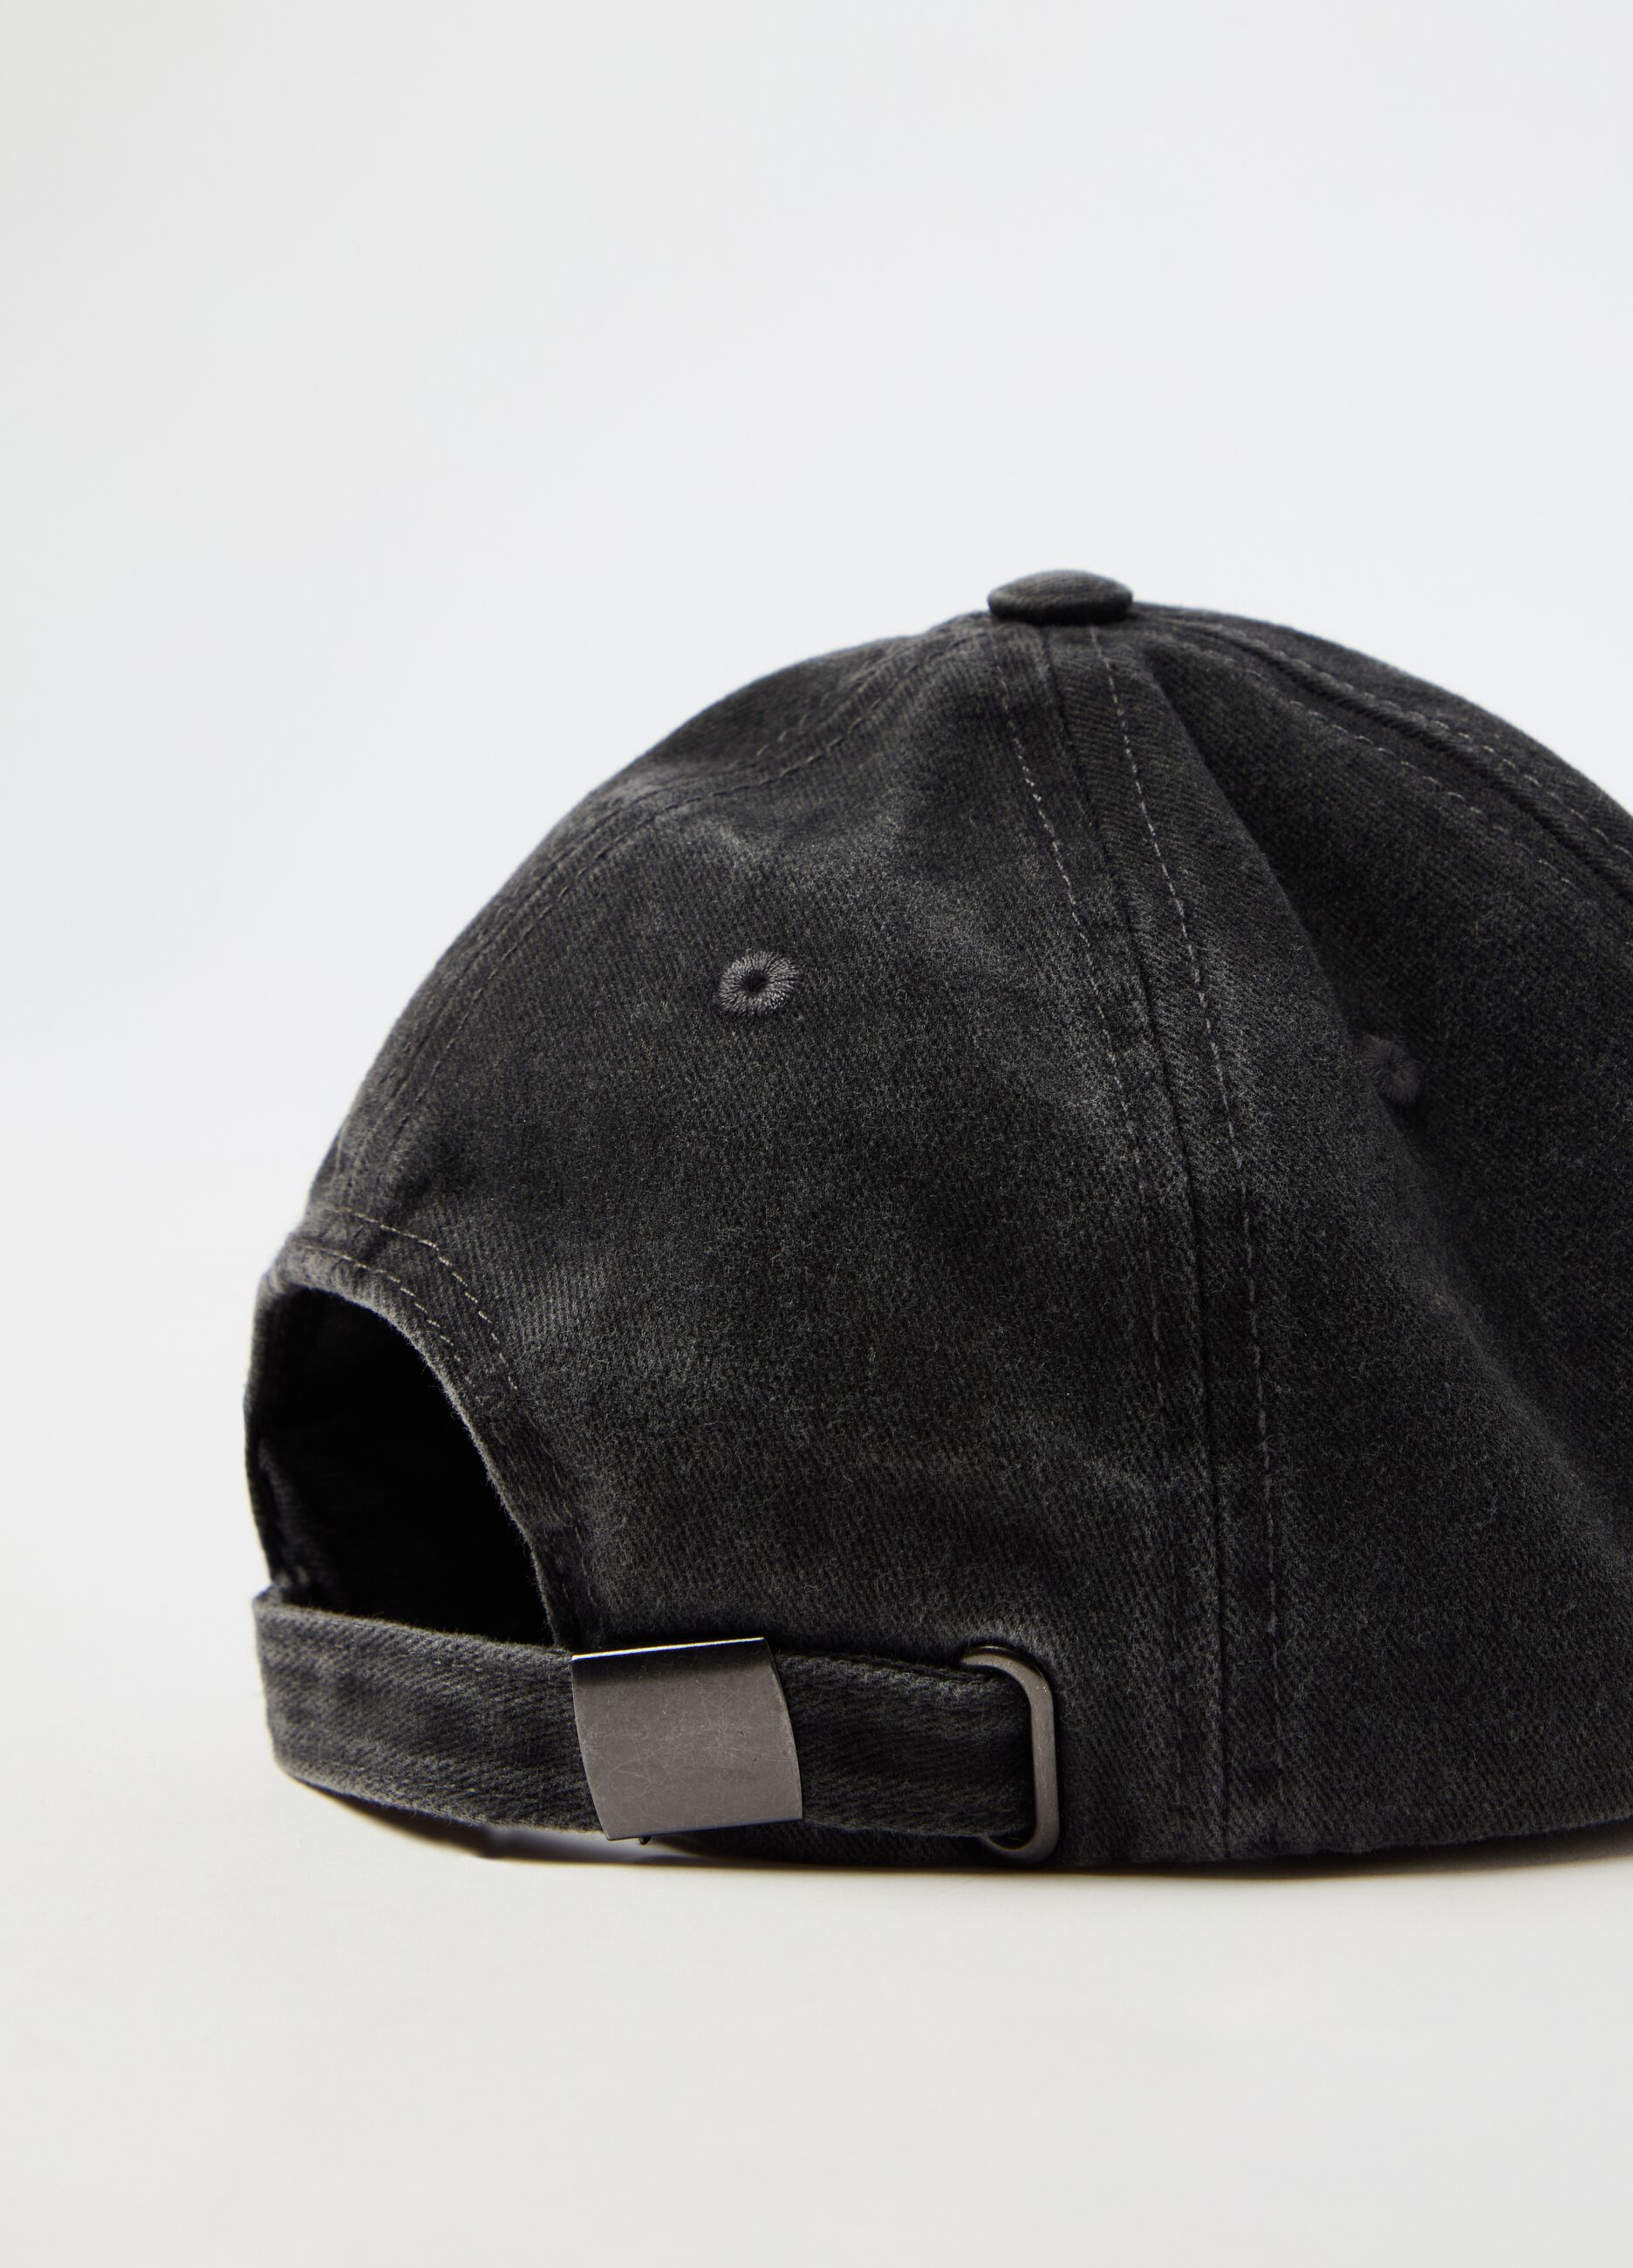 Baseball cap with abrasions